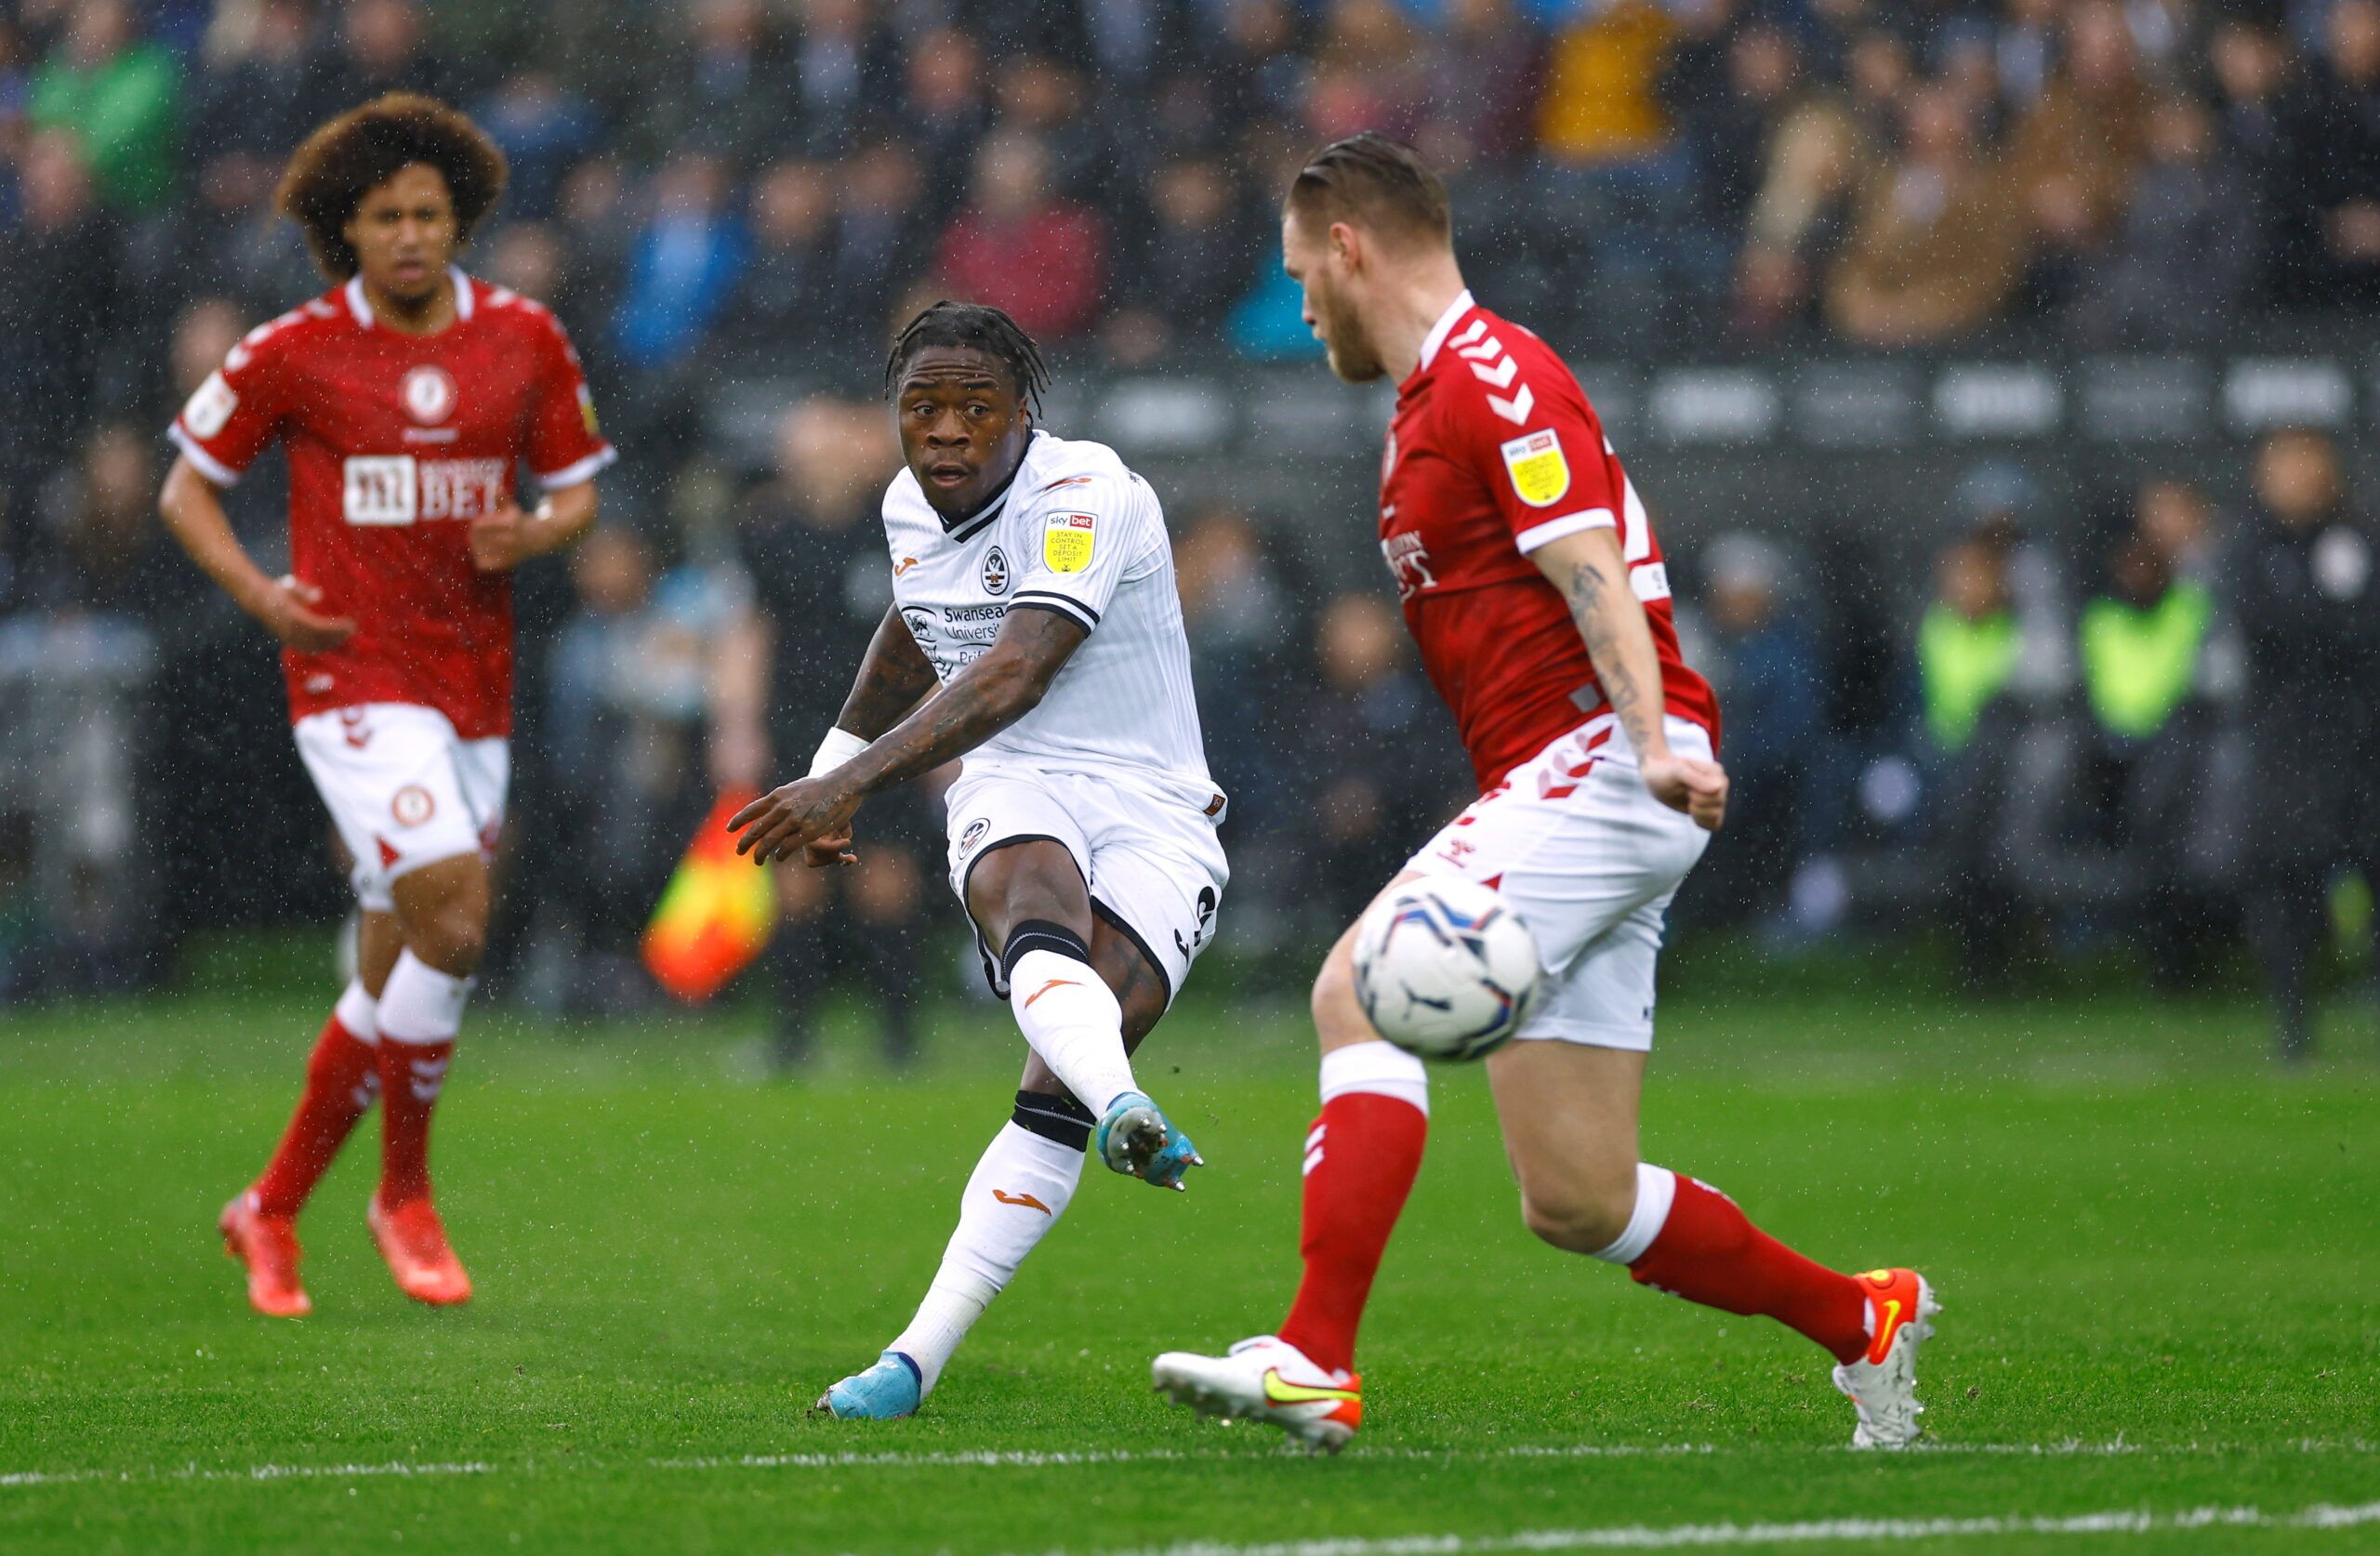 Soccer Football - Championship - Swansea City v Bristol City - Swansea.com Stadium, Swansea, Britain - February 13, 2022 Swansea City's Michael Obafemi shoots at goal     Action Images/Andrew Boyers  EDITORIAL USE ONLY. No use with unauthorized audio, video, data, fixture lists, club/league logos or 